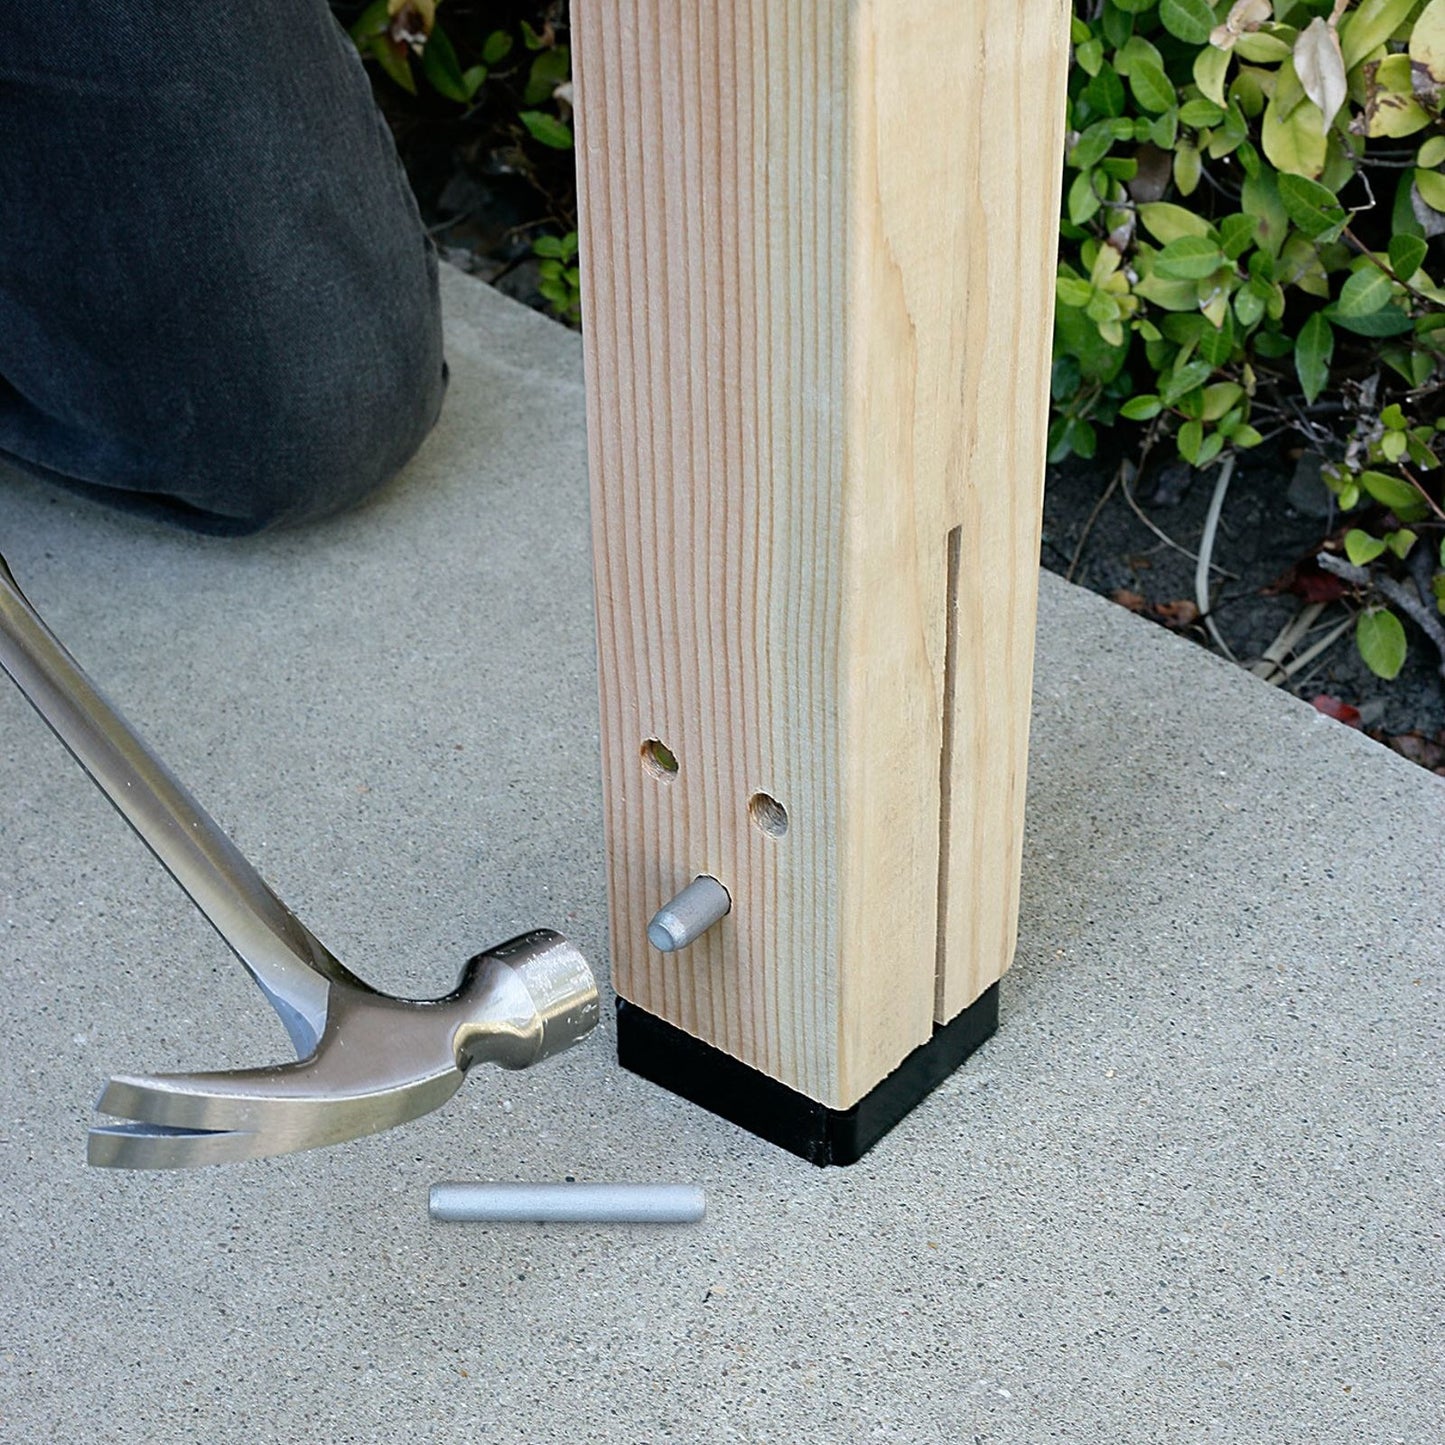 Simpson CPT44Z Concealed Post Tie For 4x4 Posts Zmax Finish image 2 of 7